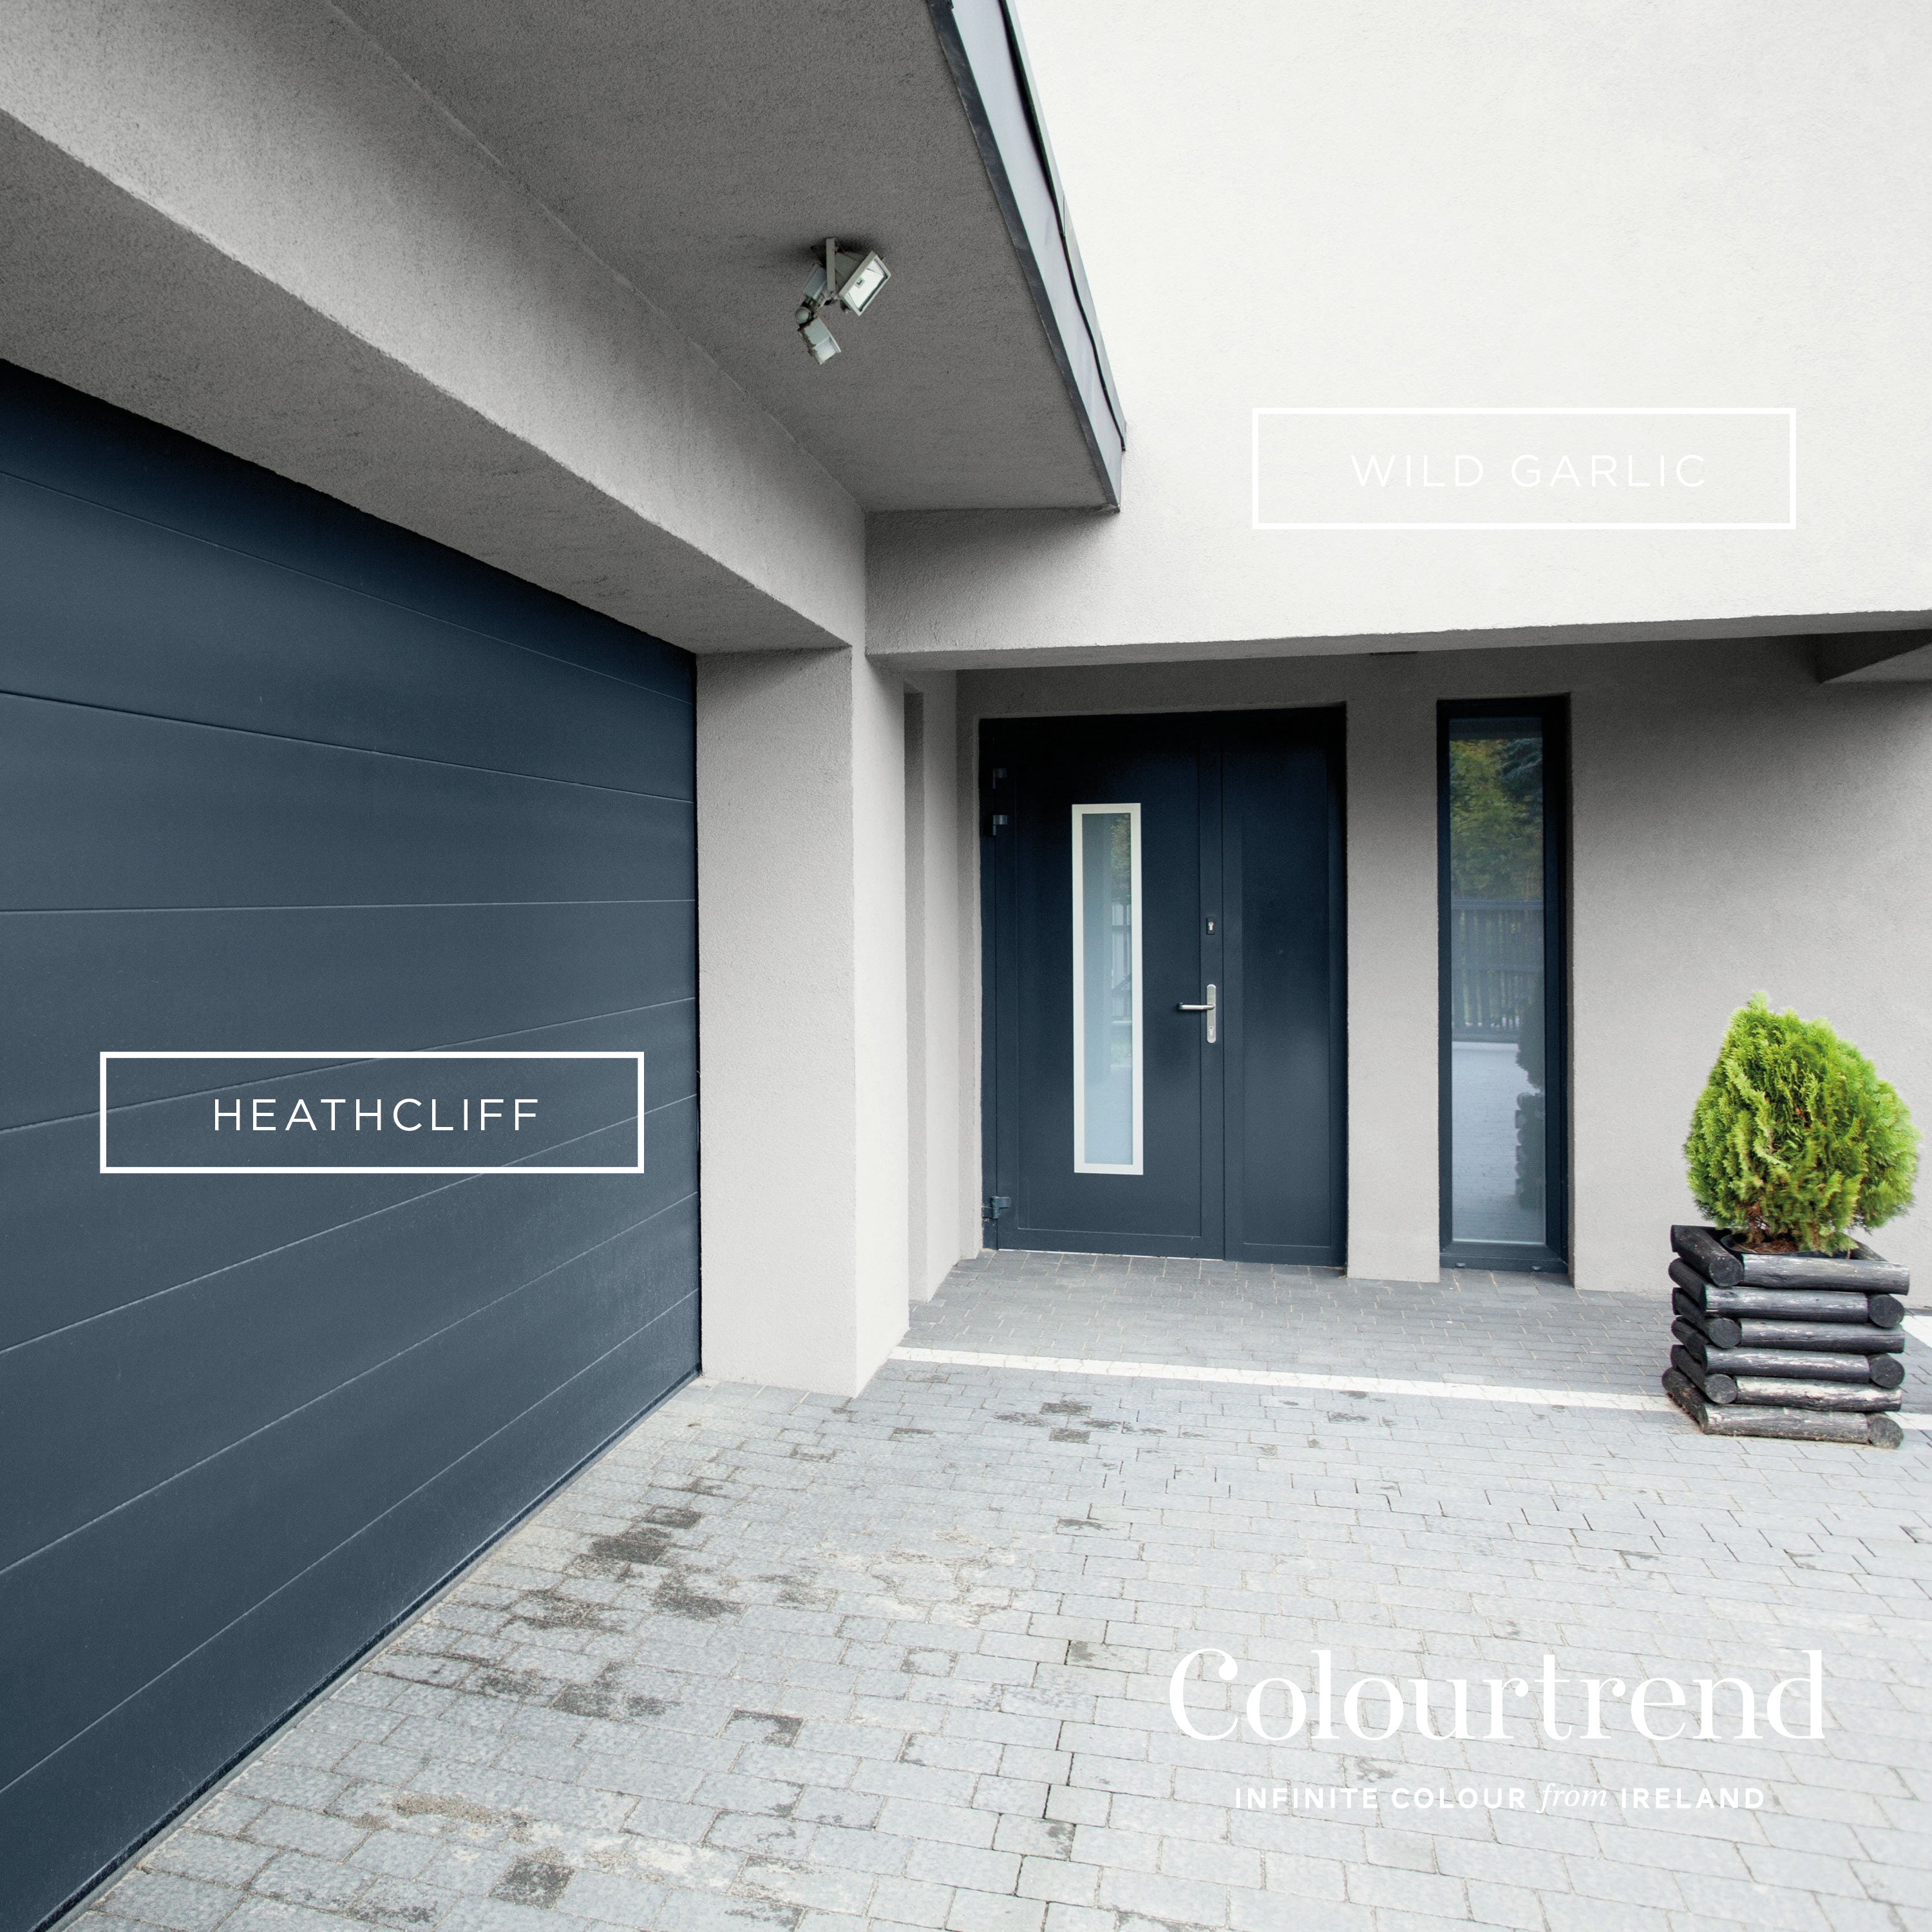 Colourtrend Heathcliff | Same Day Dublin Delivery Weirs of Baggot St